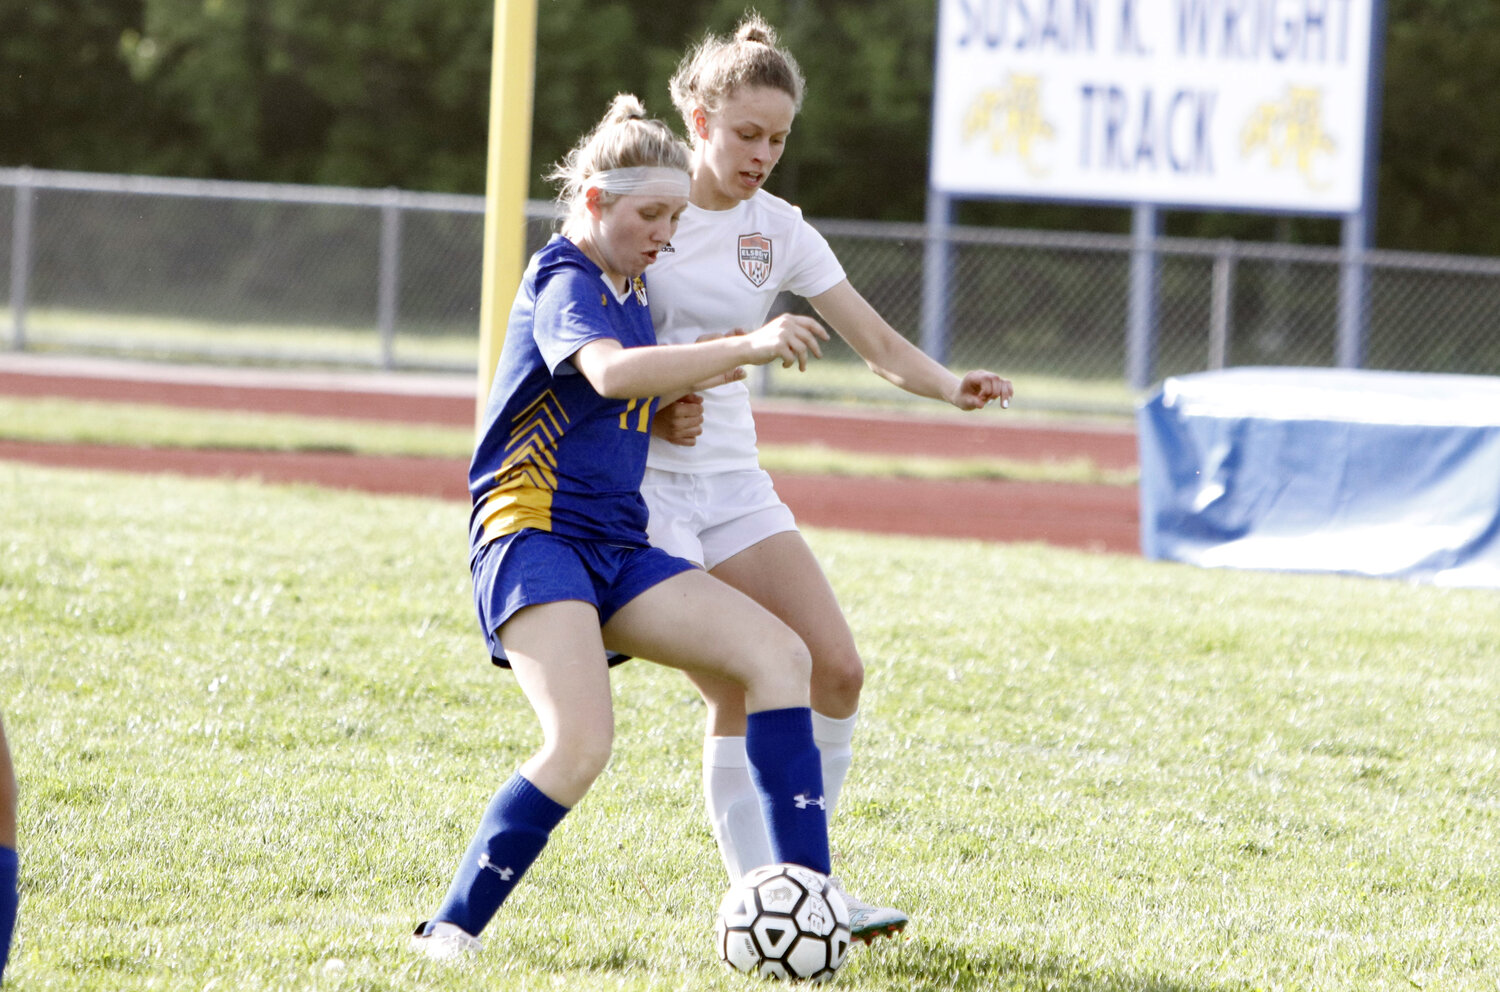 Charleigh Ferrell (left) attempts to maintain possession of the ball during last week's loss to Elsberry.